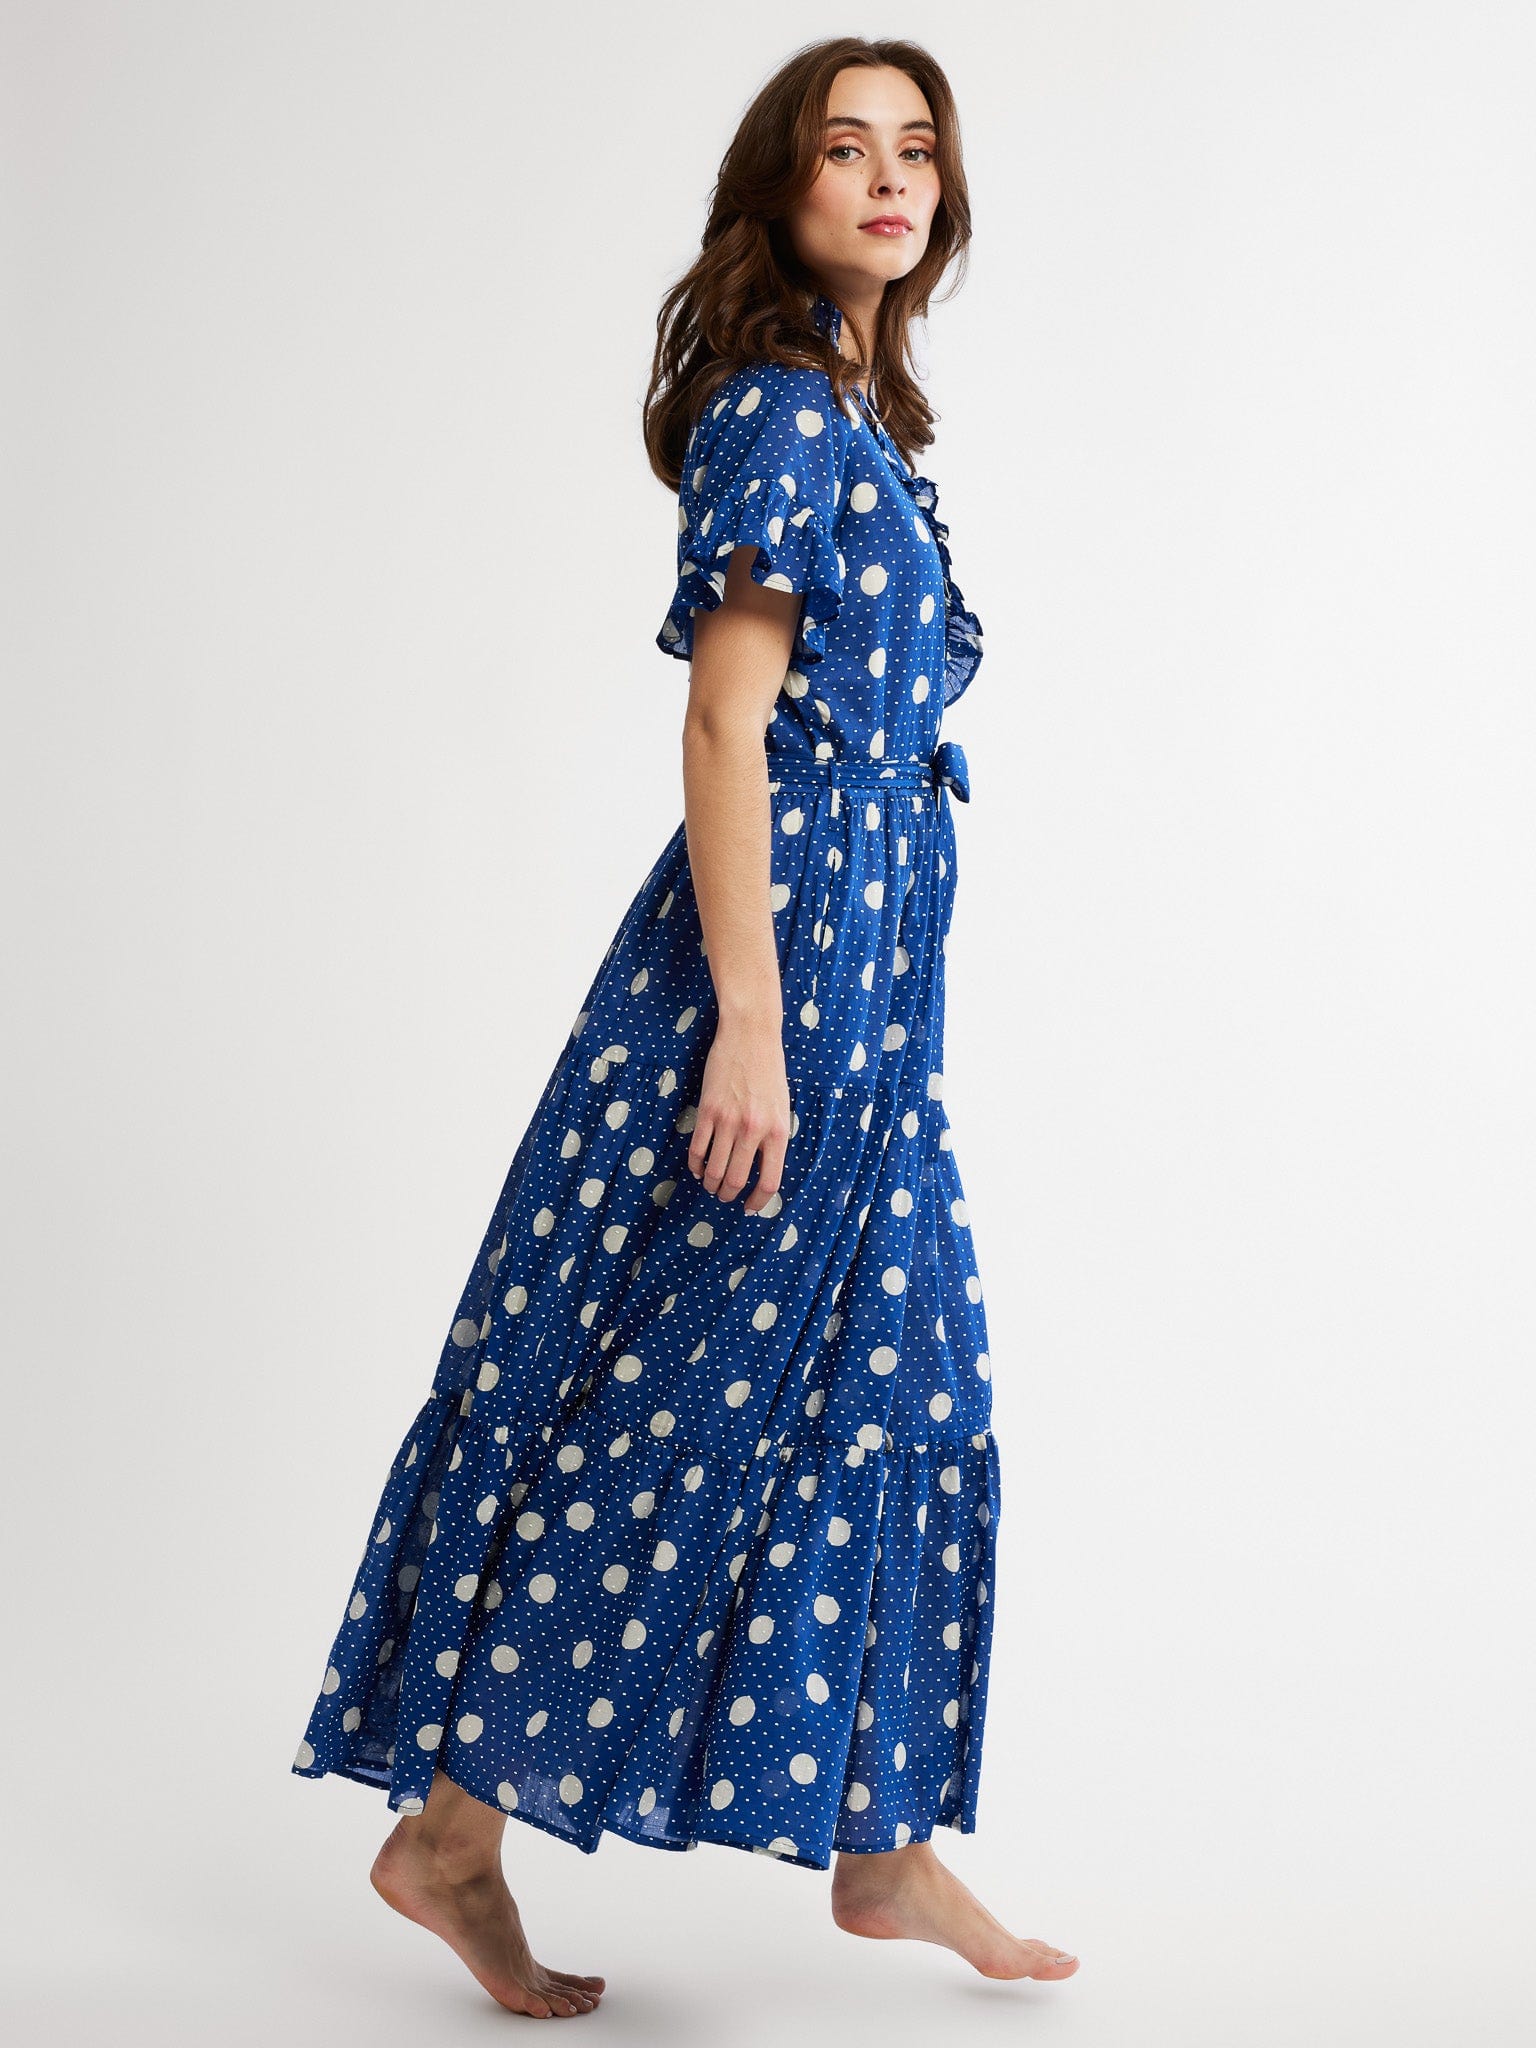 MILLE Clothing Victoria Dress in Summer Moon